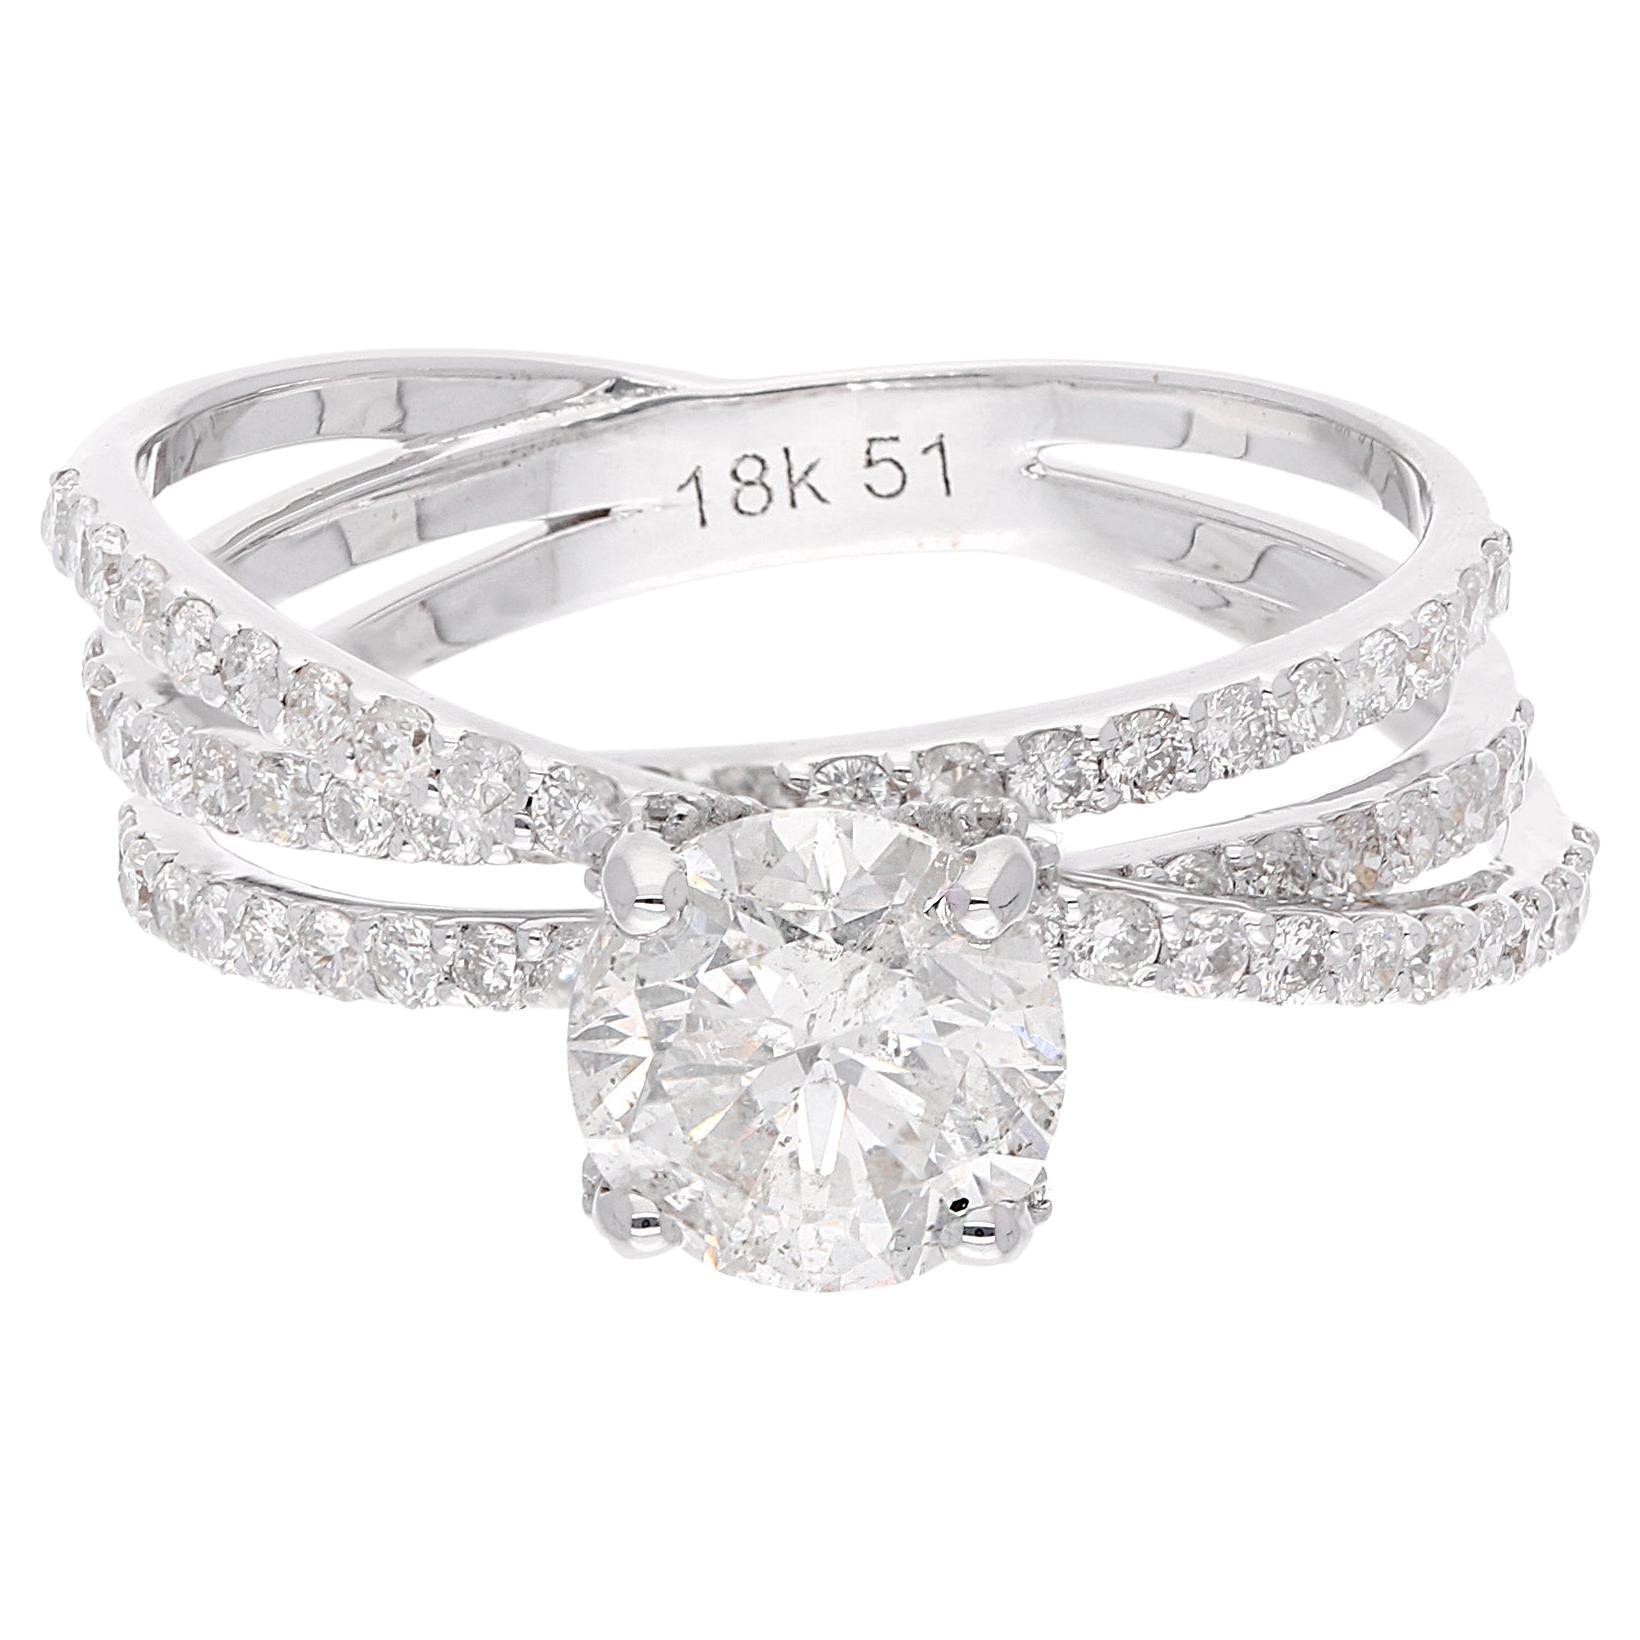 For Sale:  1.96 Carat SI Clarity HI Color Solitaire Diamond Band Ring 18 Karat White Gold